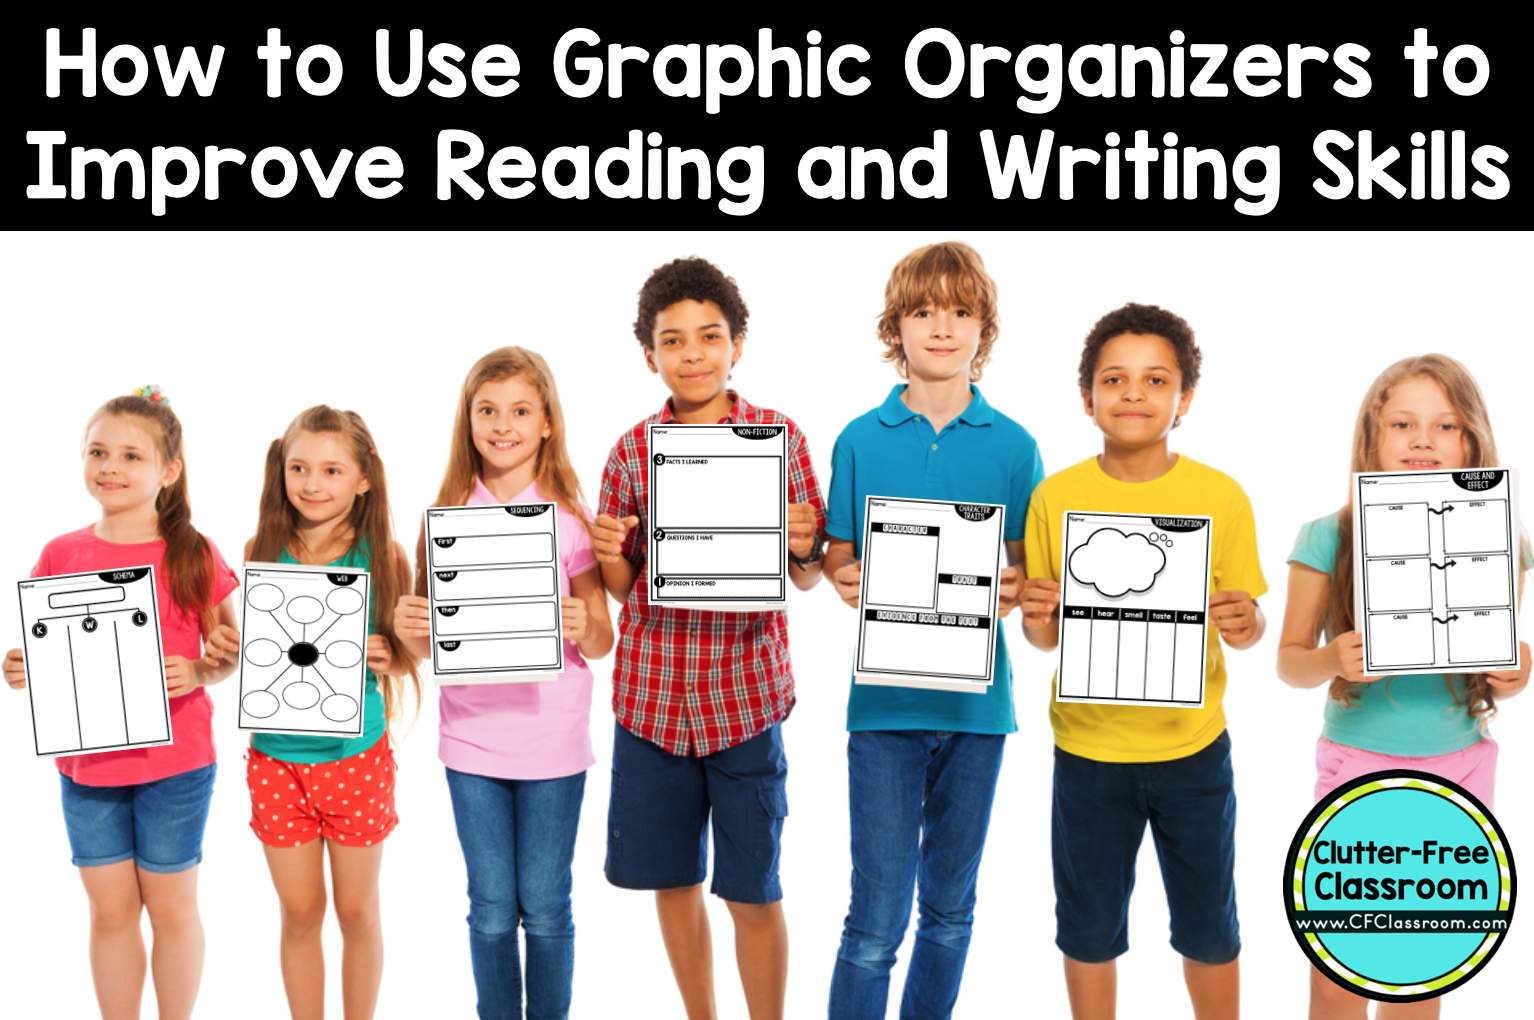 Would you like to improve your students' reading and writing skills? Using graphic organizers for reading comprehension will make it easier for students to make sense of what they are reading, organize their thinking, and strengthen their writing abilities as well. This post explains how.